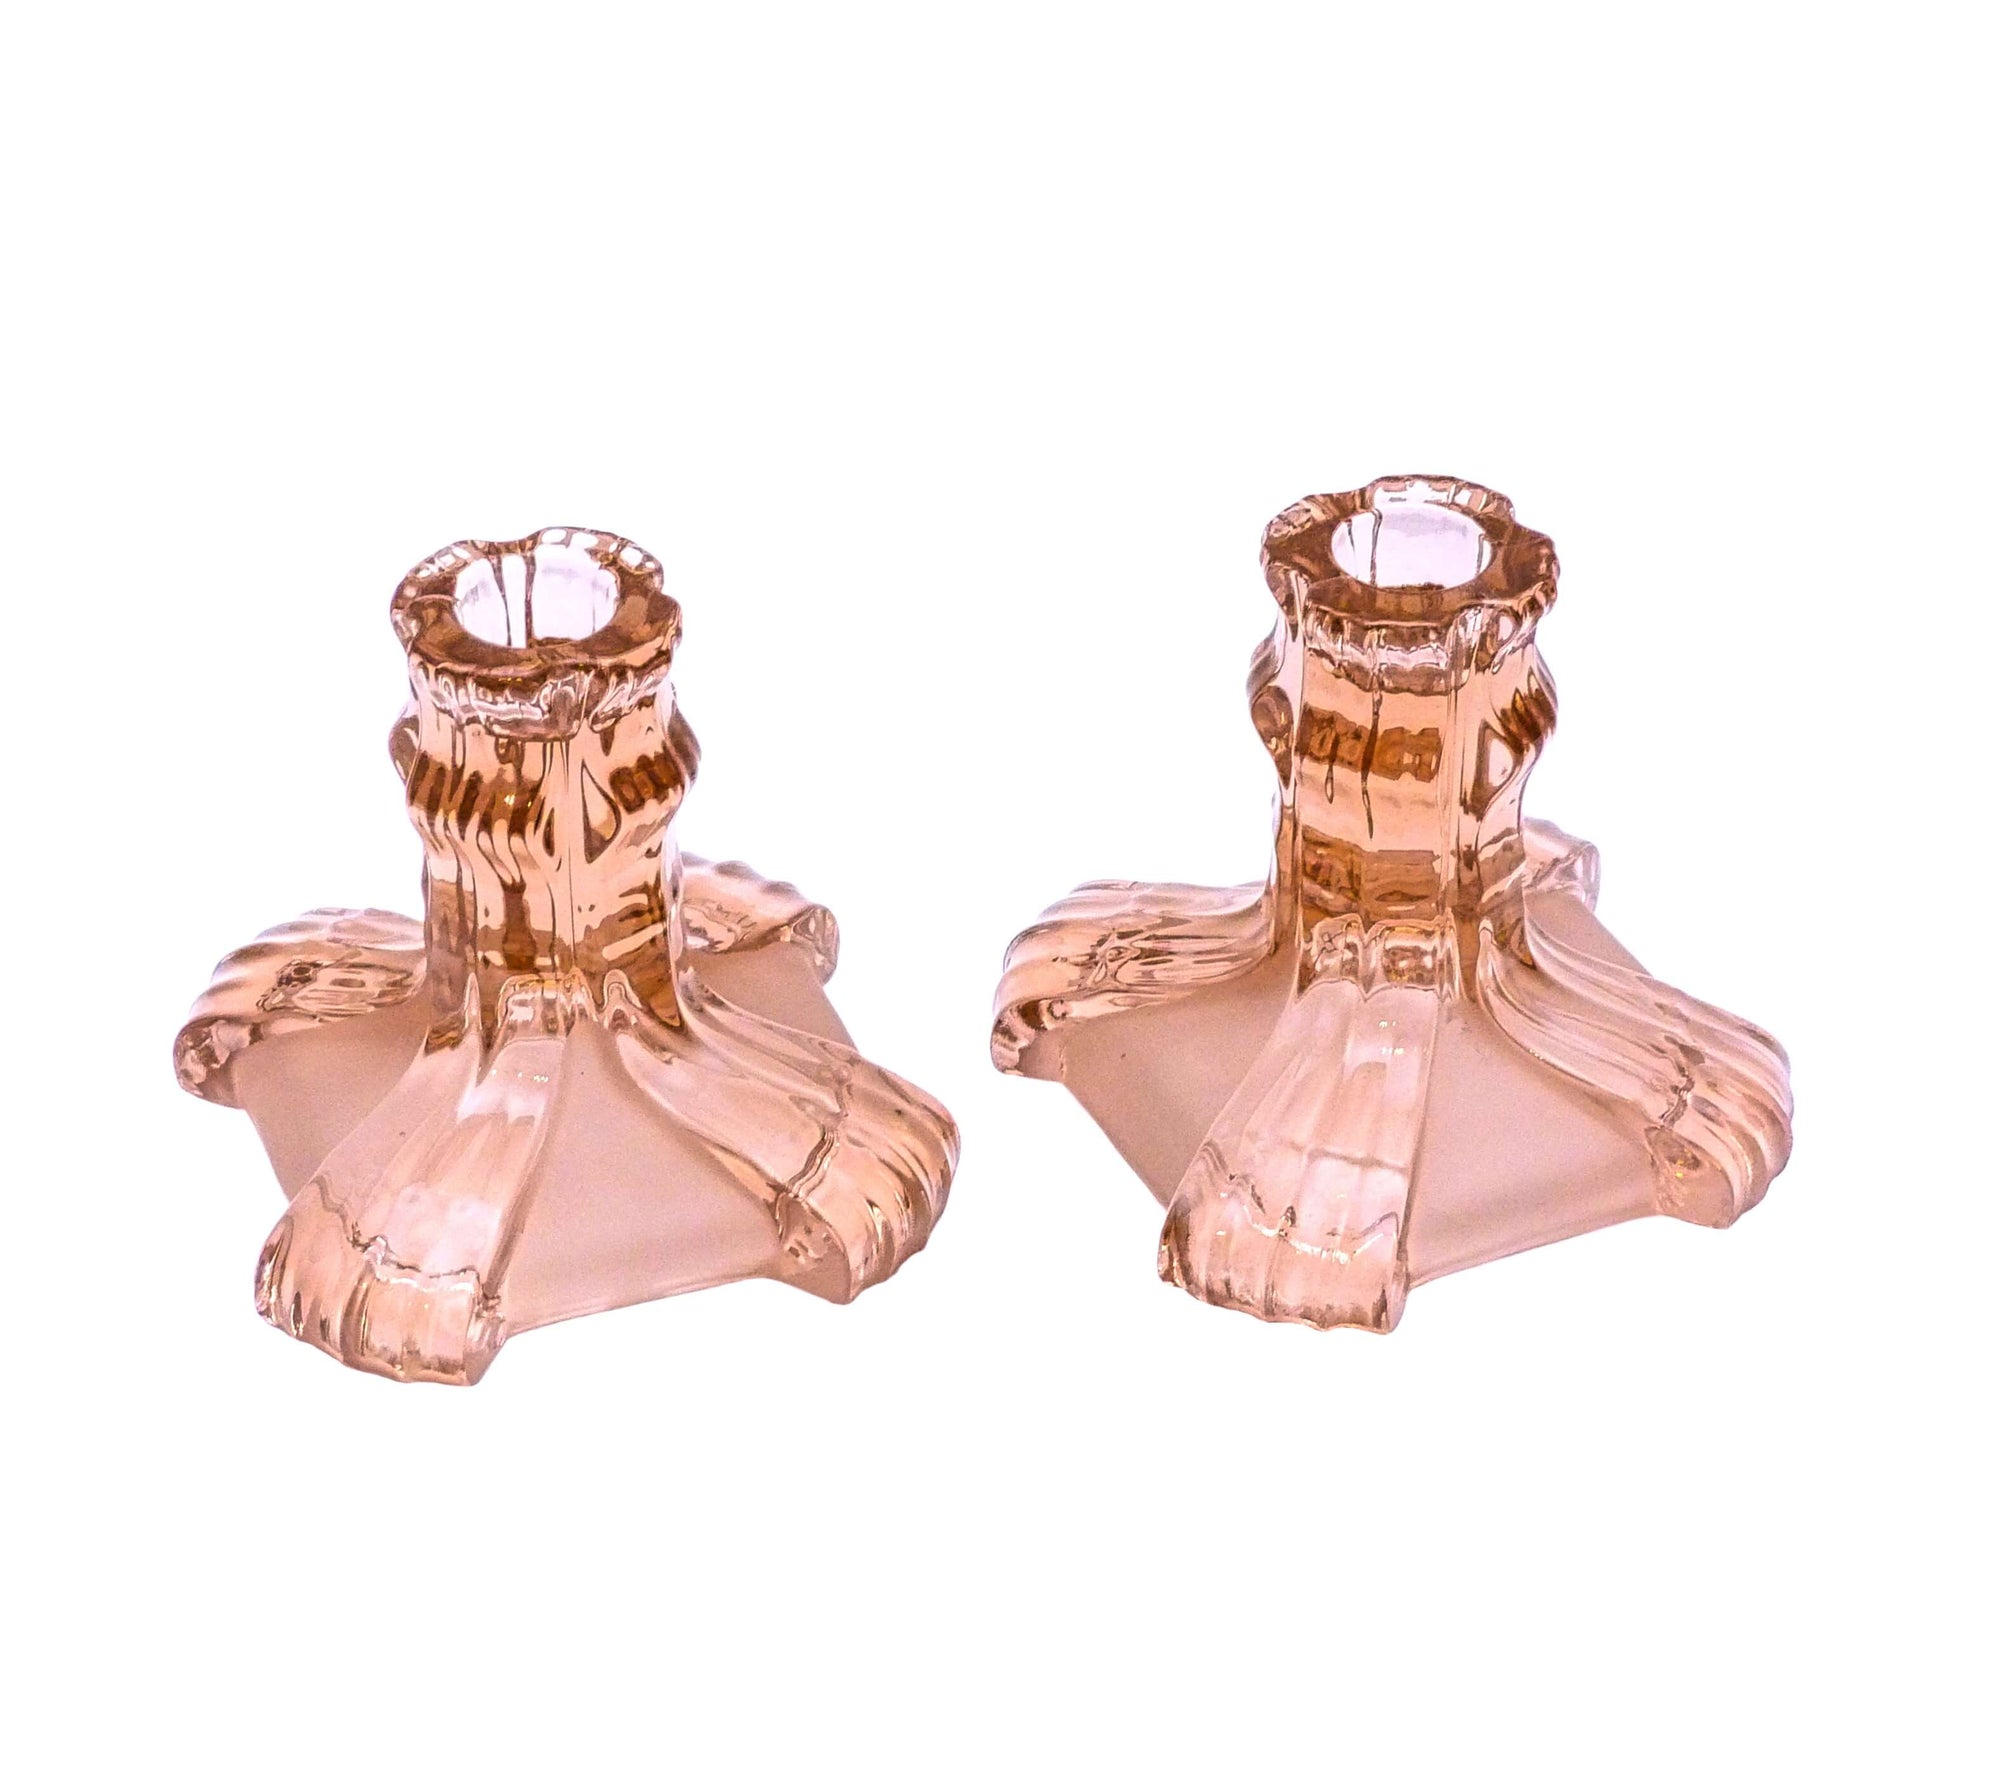 The pair of candle holders are made of clear and frosted pink glass with a square base.